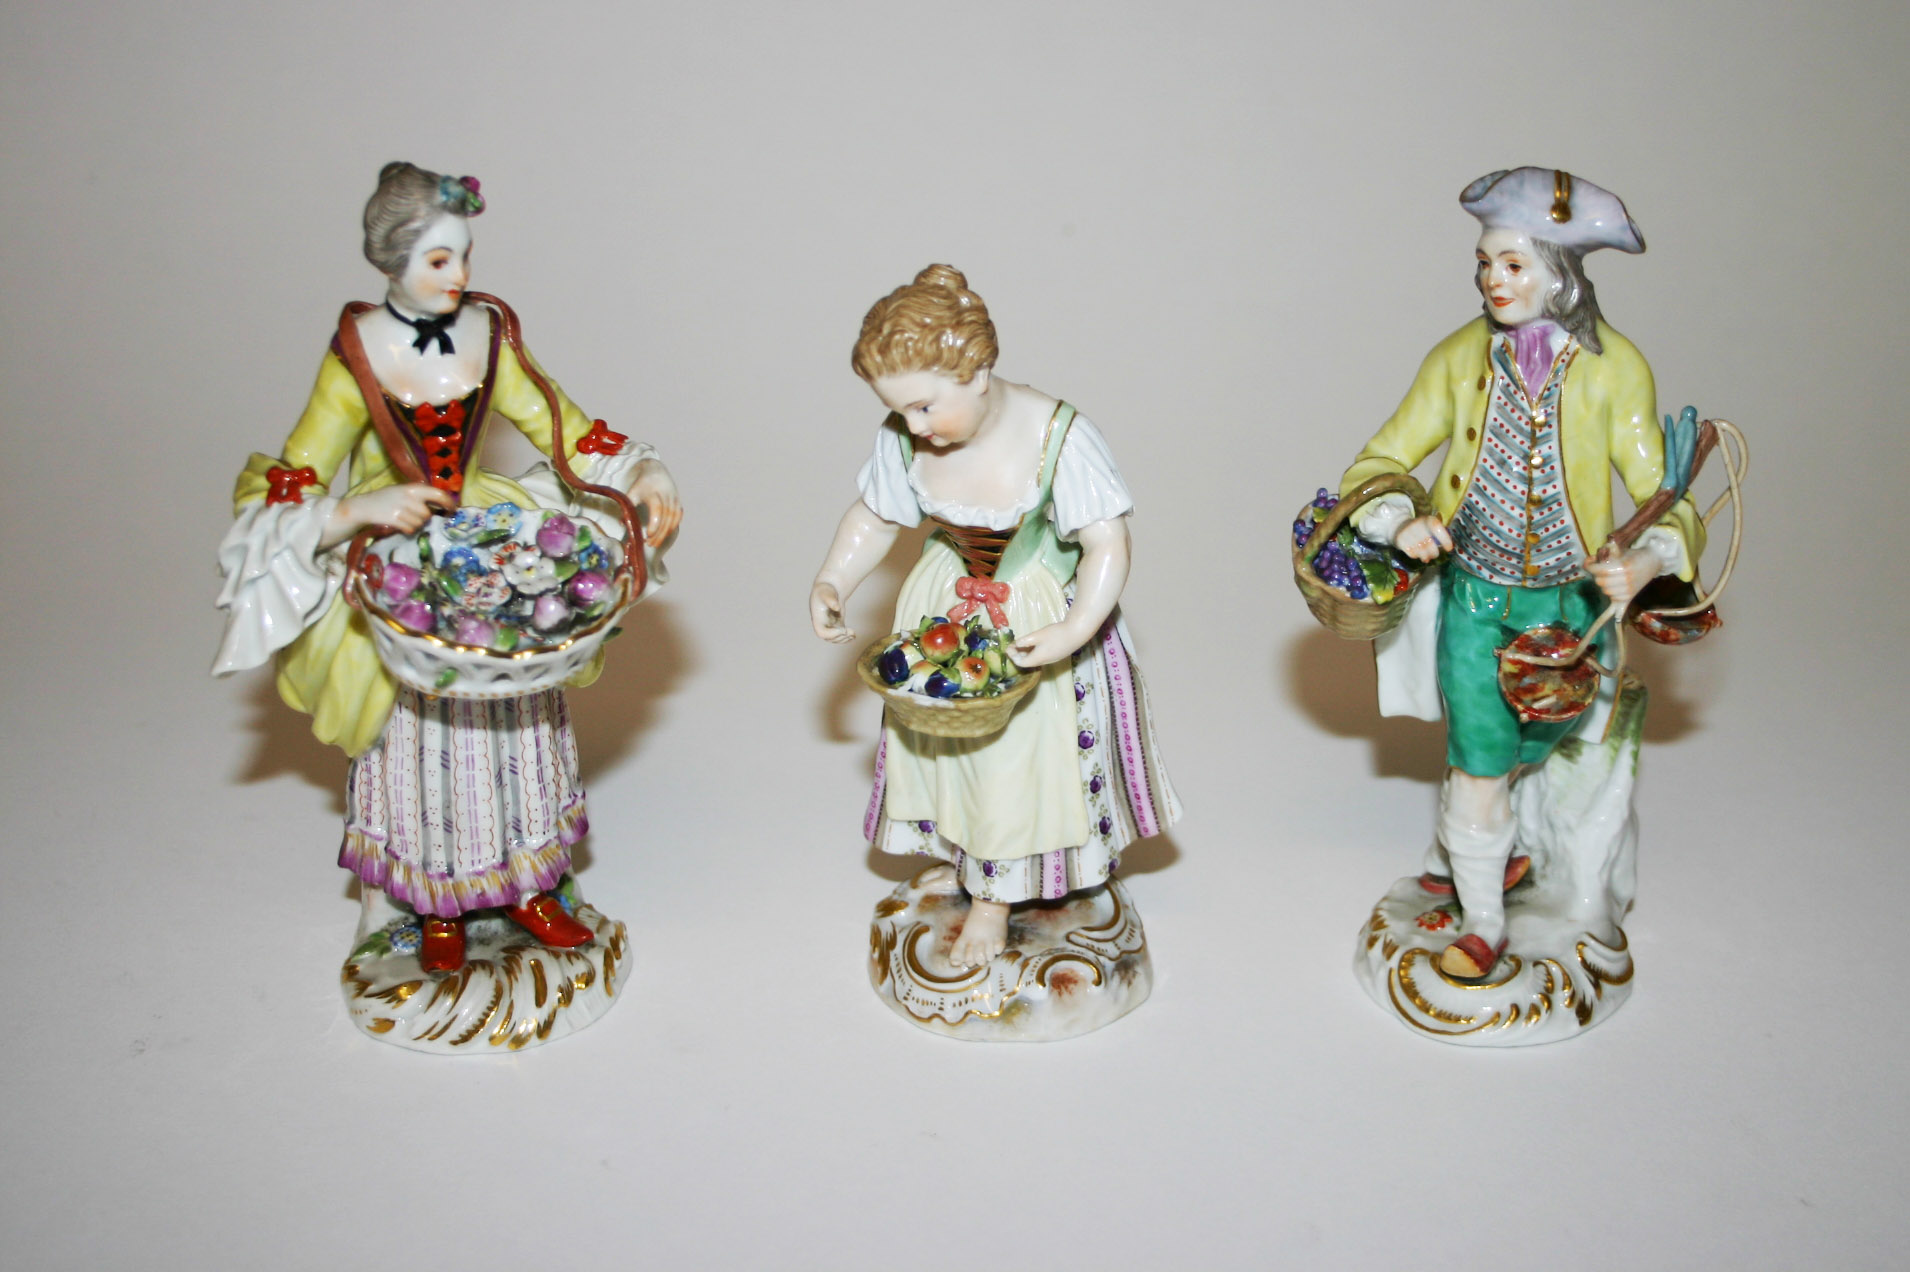 THREE SIMILAR MEISSEN PORCELAIN FIGURES, early 20th century, one modelled as a gentleman with basket